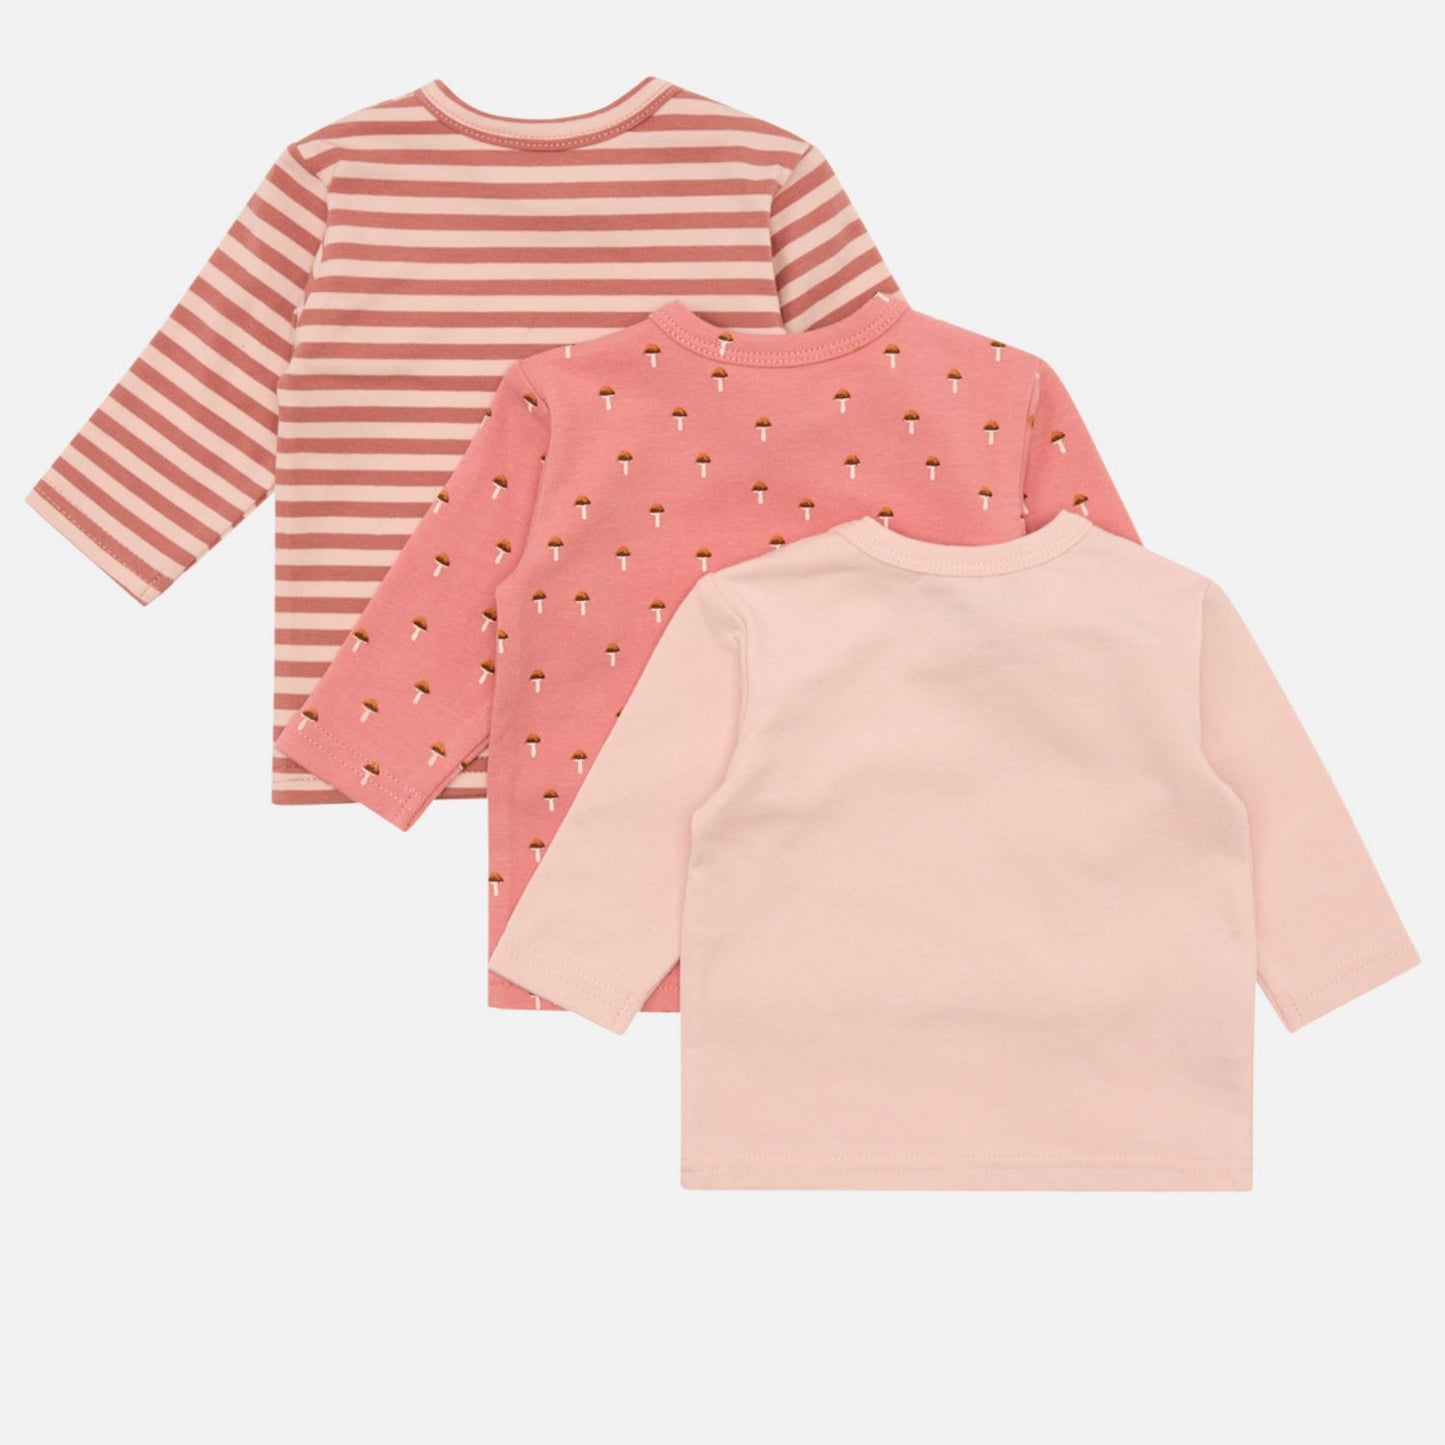 Little Farm | Peach Dust | Pack of 3 Assorted Long Sleeve Baby Top | GOTS Organic Cotton